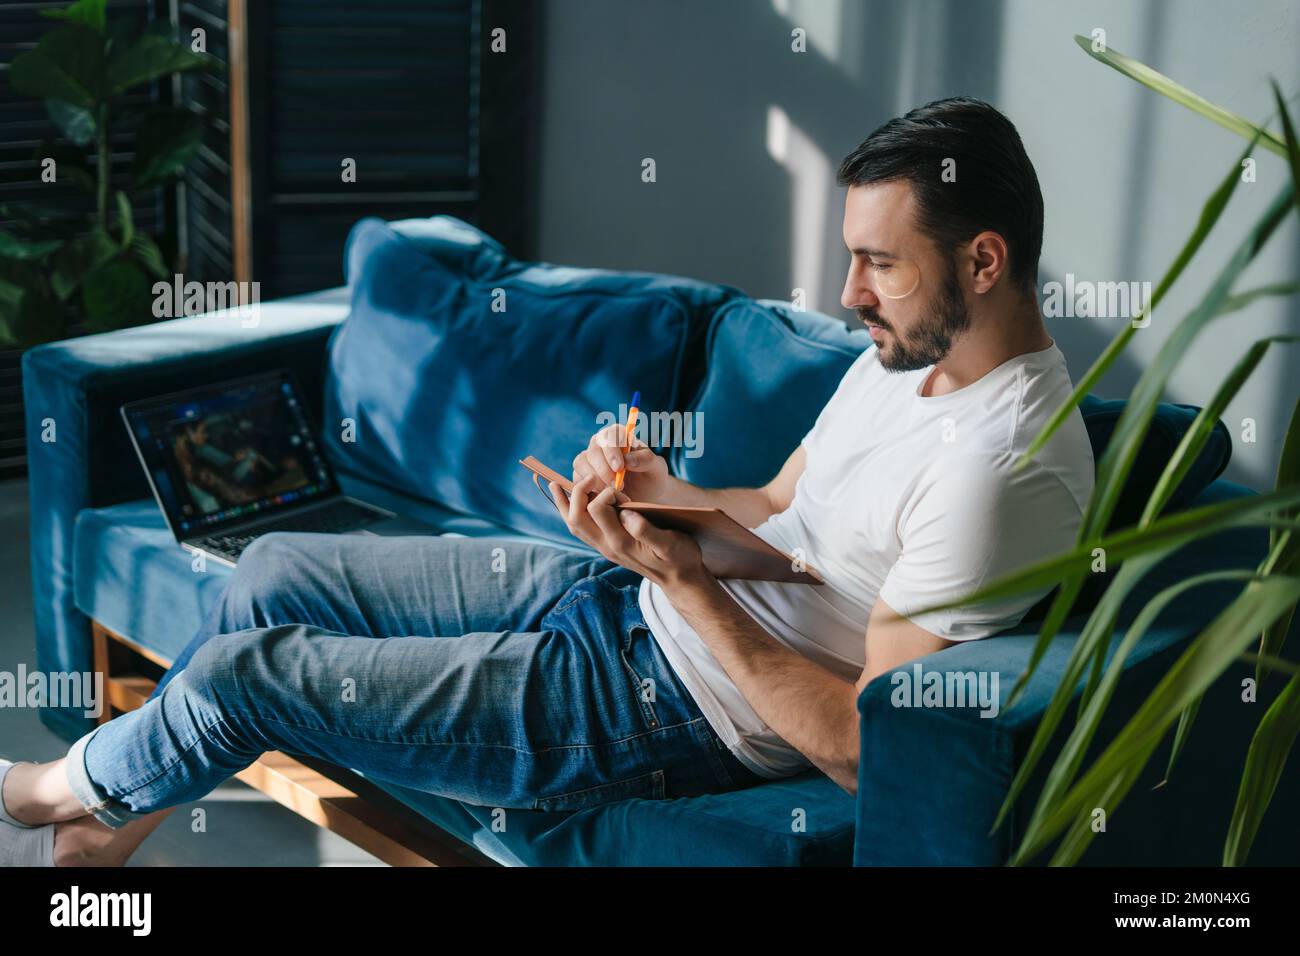 Young man sitting on sofa writing down information in red note book, taking important notes with pencil. Resting on weekends staying at home. Stock Photo